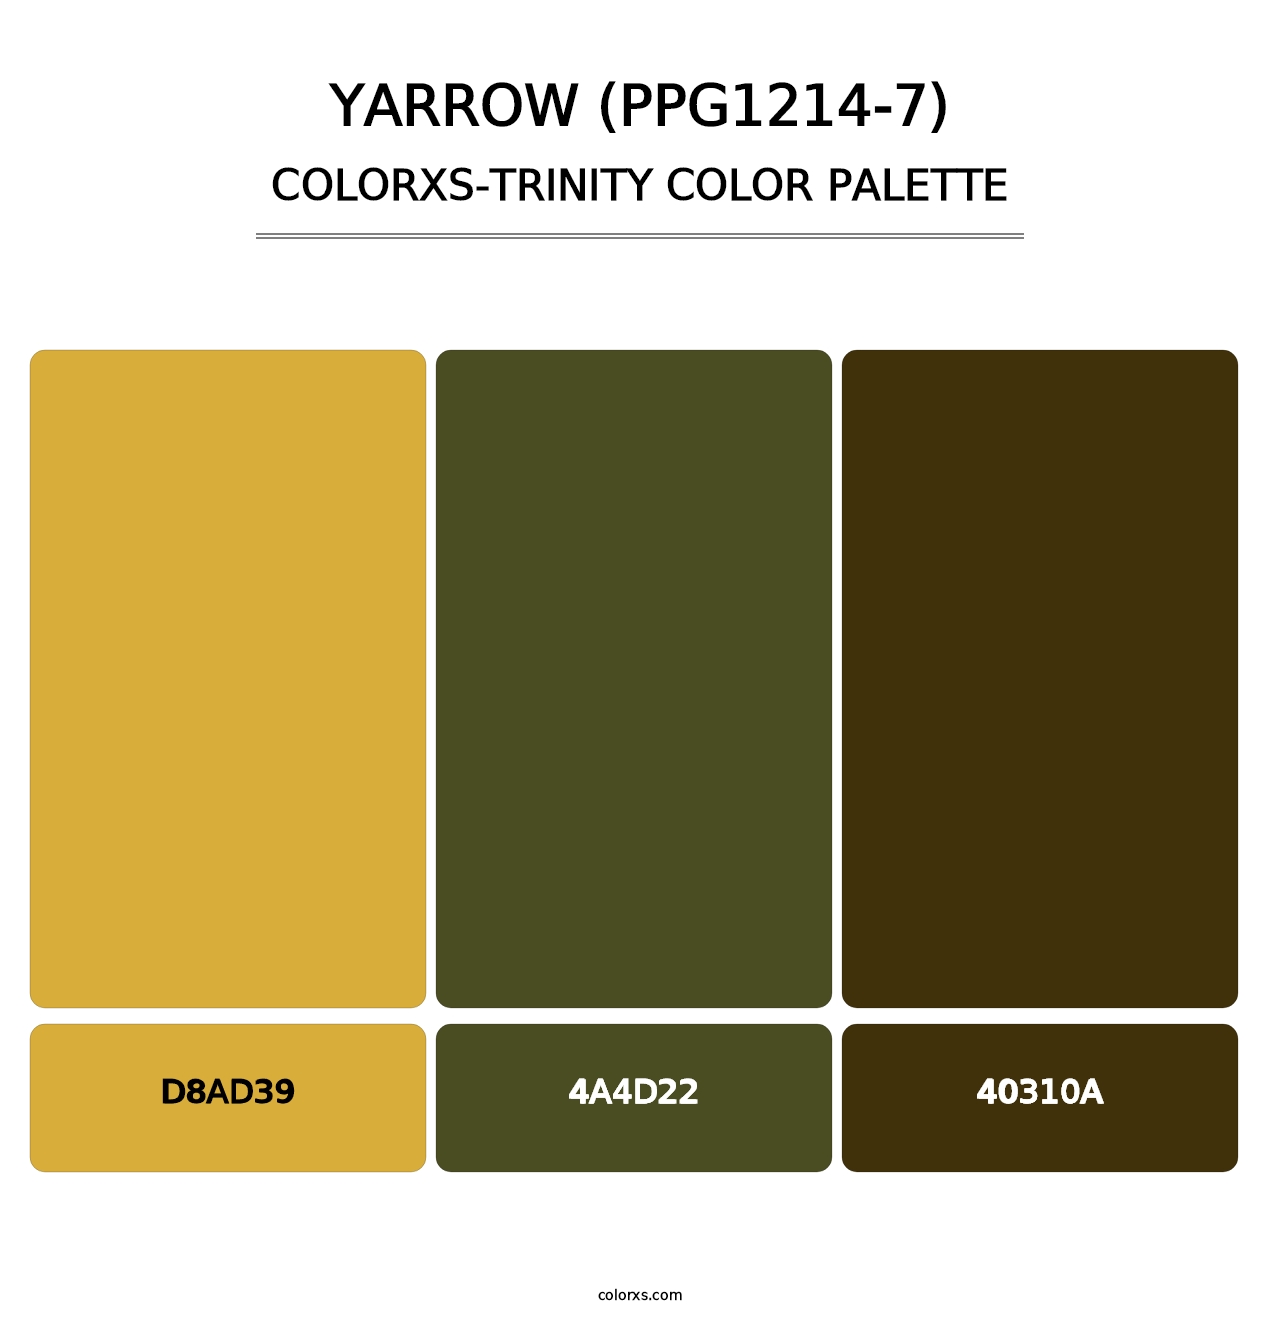 Yarrow (PPG1214-7) - Colorxs Trinity Palette